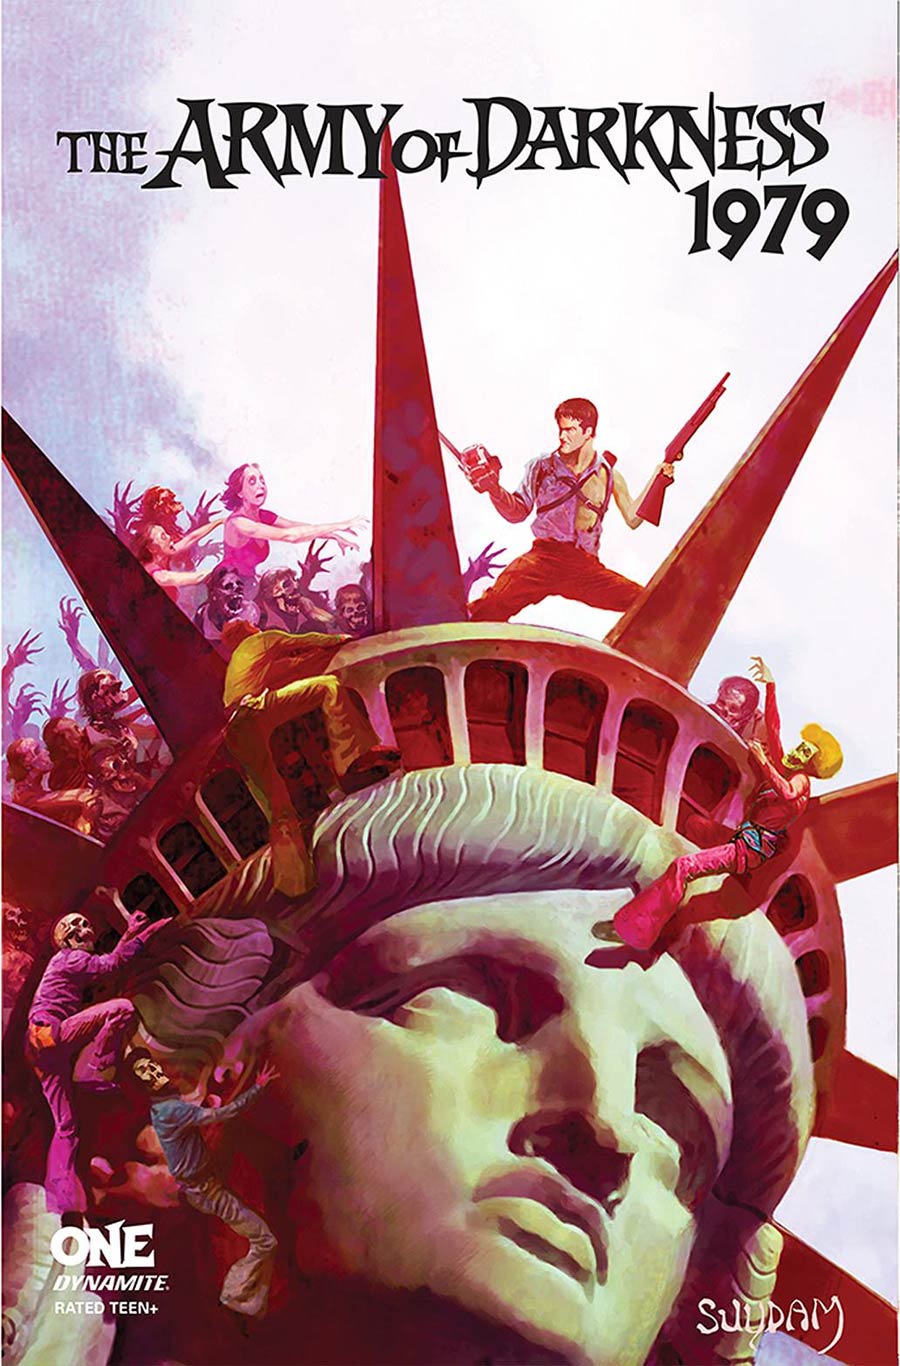 Army Of Darkness 1979 #1 Cover B Variant Arthur Suydam Cover